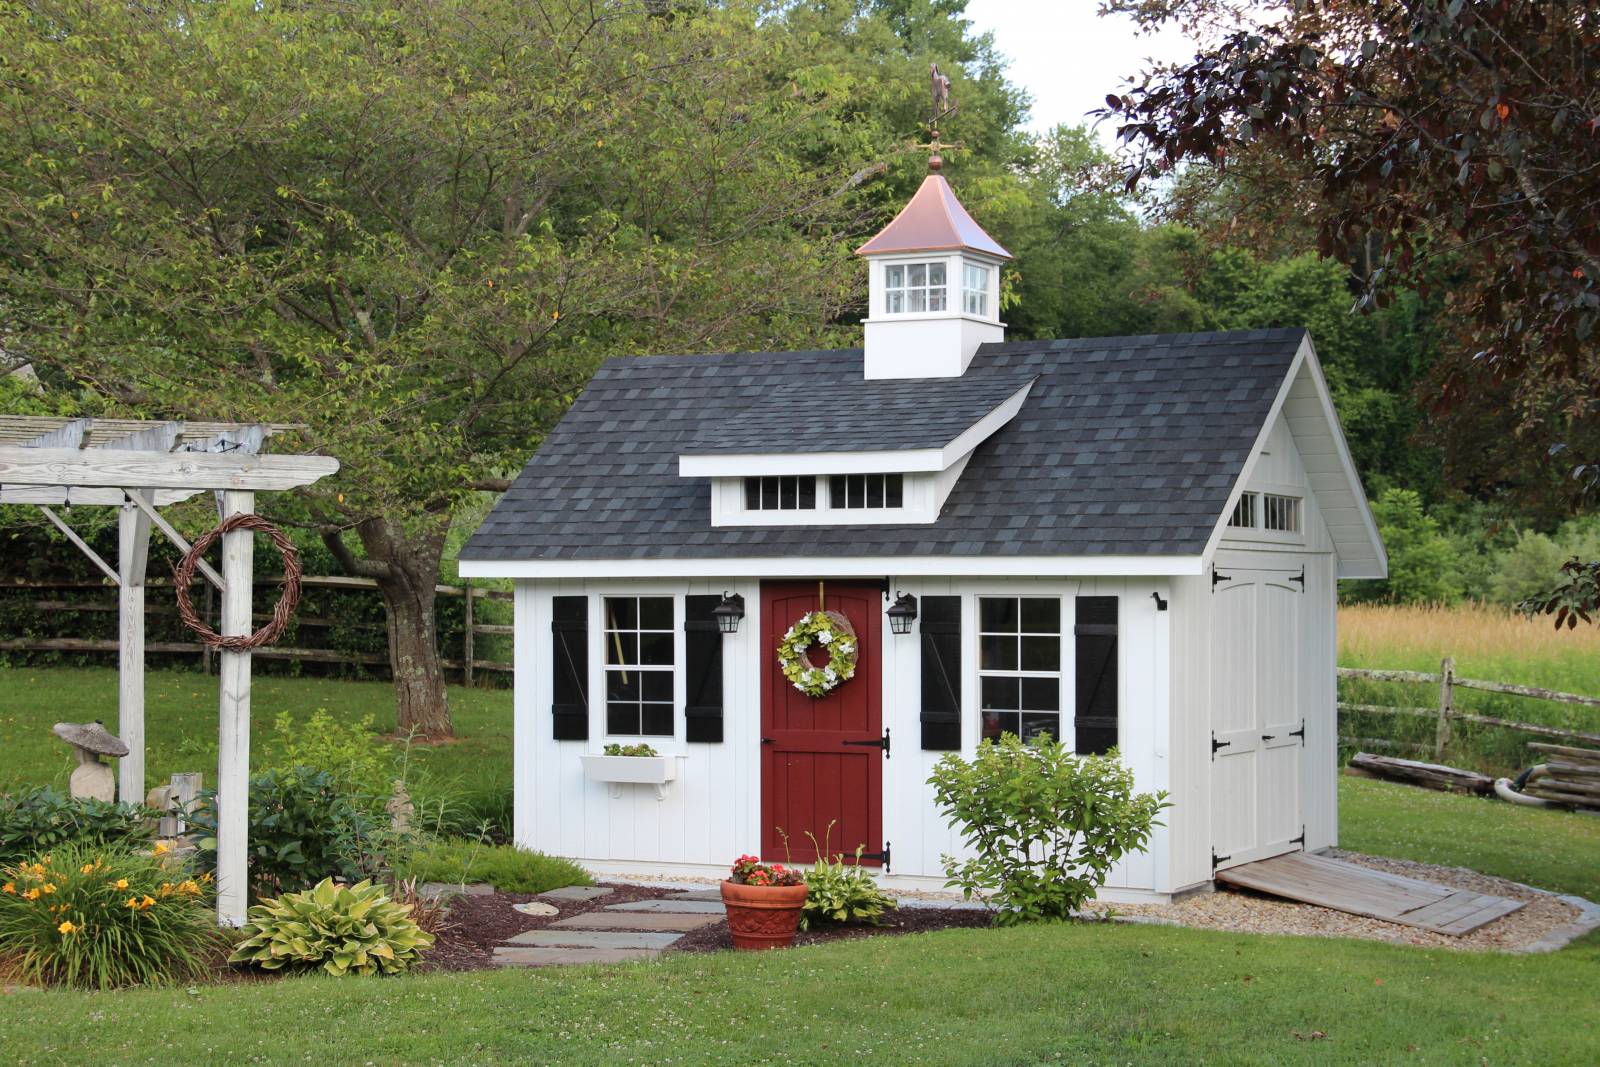 12' x 16' Victorian Carriage House, Newtown, CT